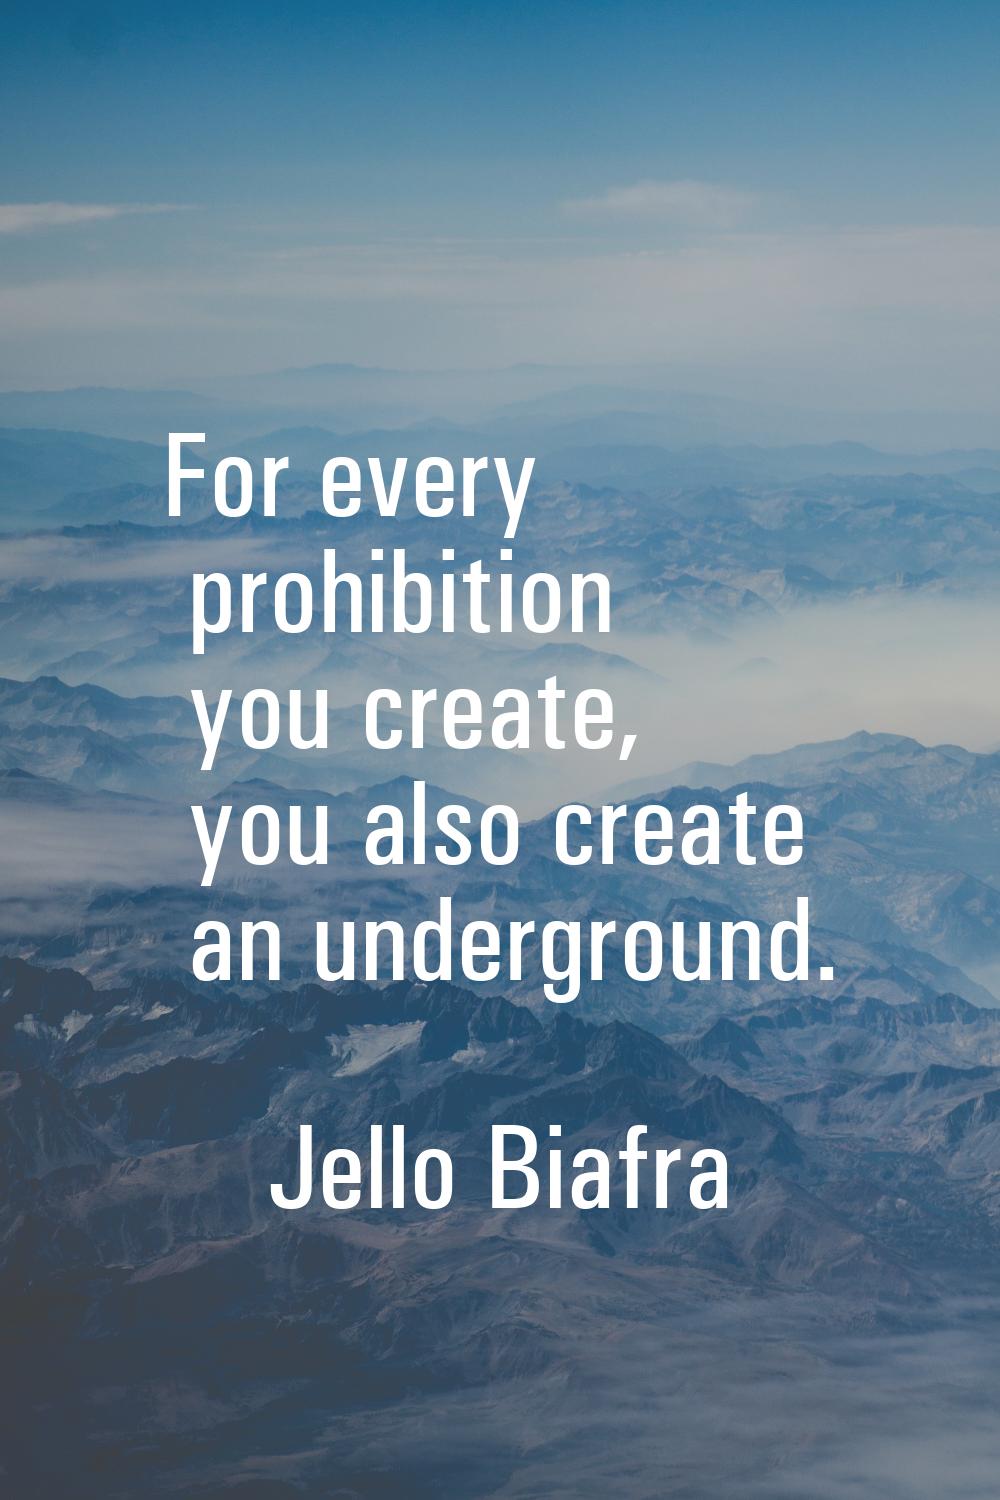 For every prohibition you create, you also create an underground.